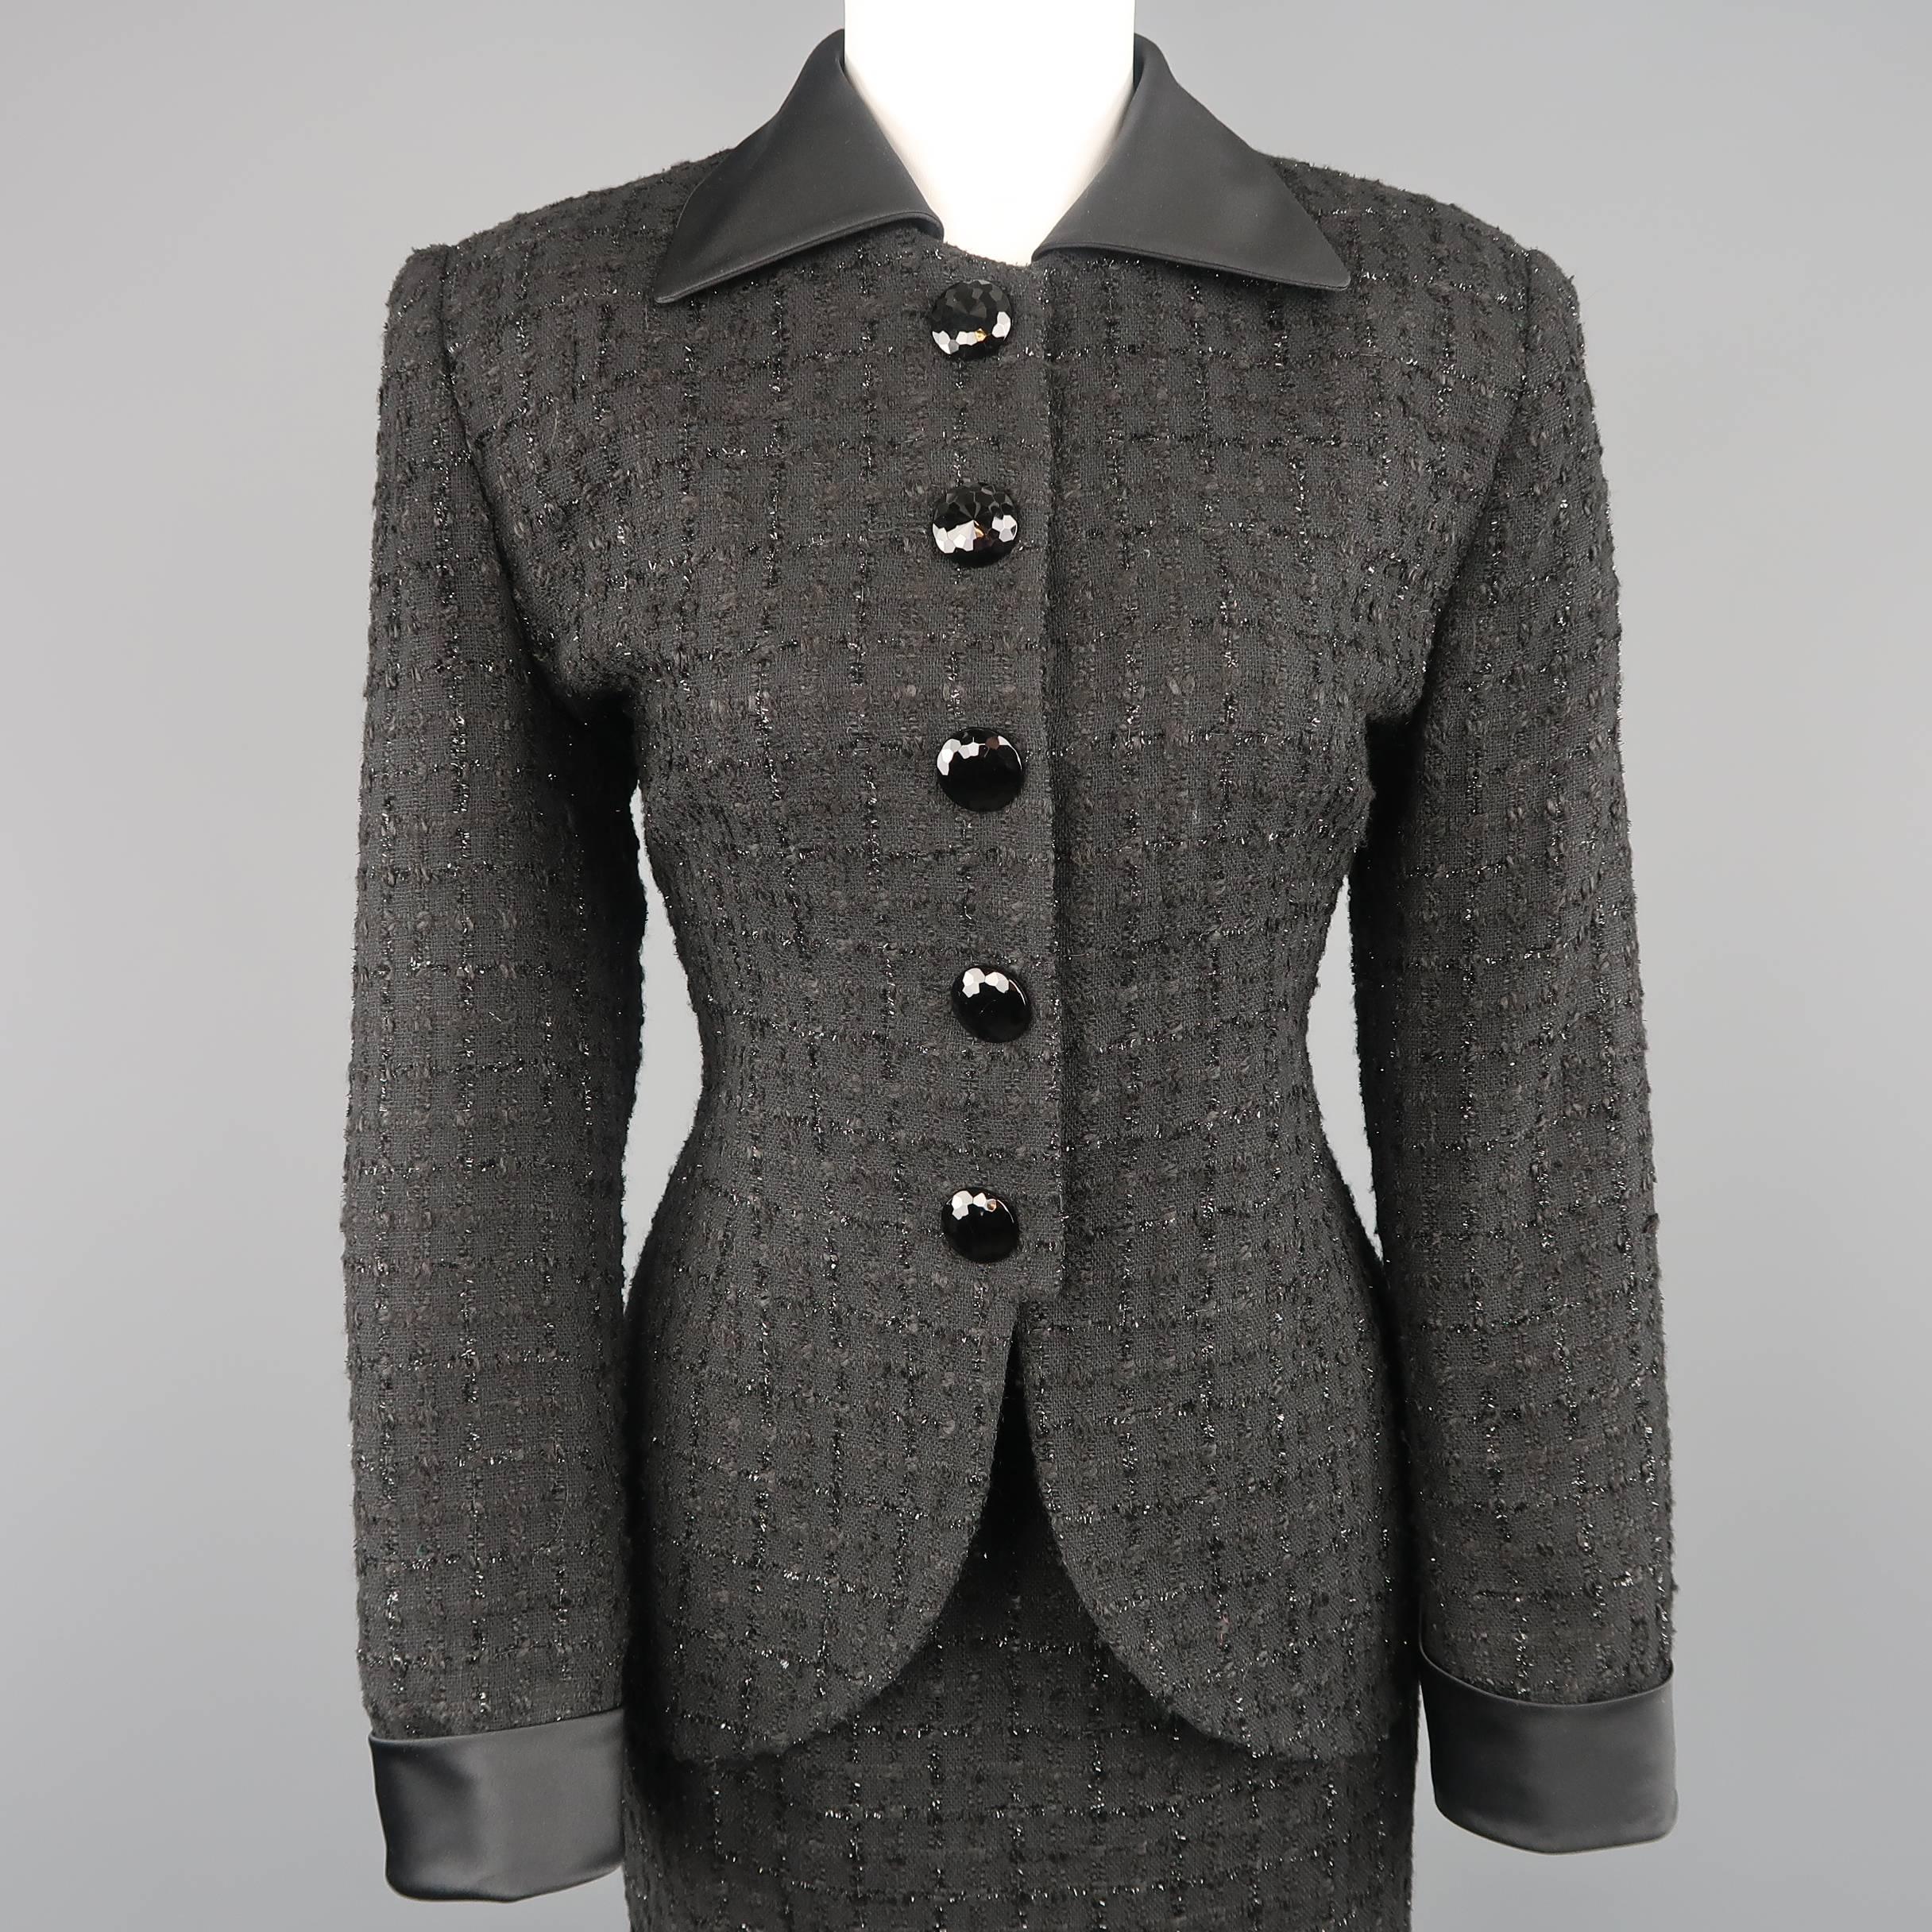 Vintage CHRISTIAN DIOR suit comes in black on black plaid boucle with lurex stripes and includes a tailored jacket with five oversized crystal buttons and detachable silk satin collar and cuffs with matching skirt. Made in USA.
 
Excellent Pre-Owned